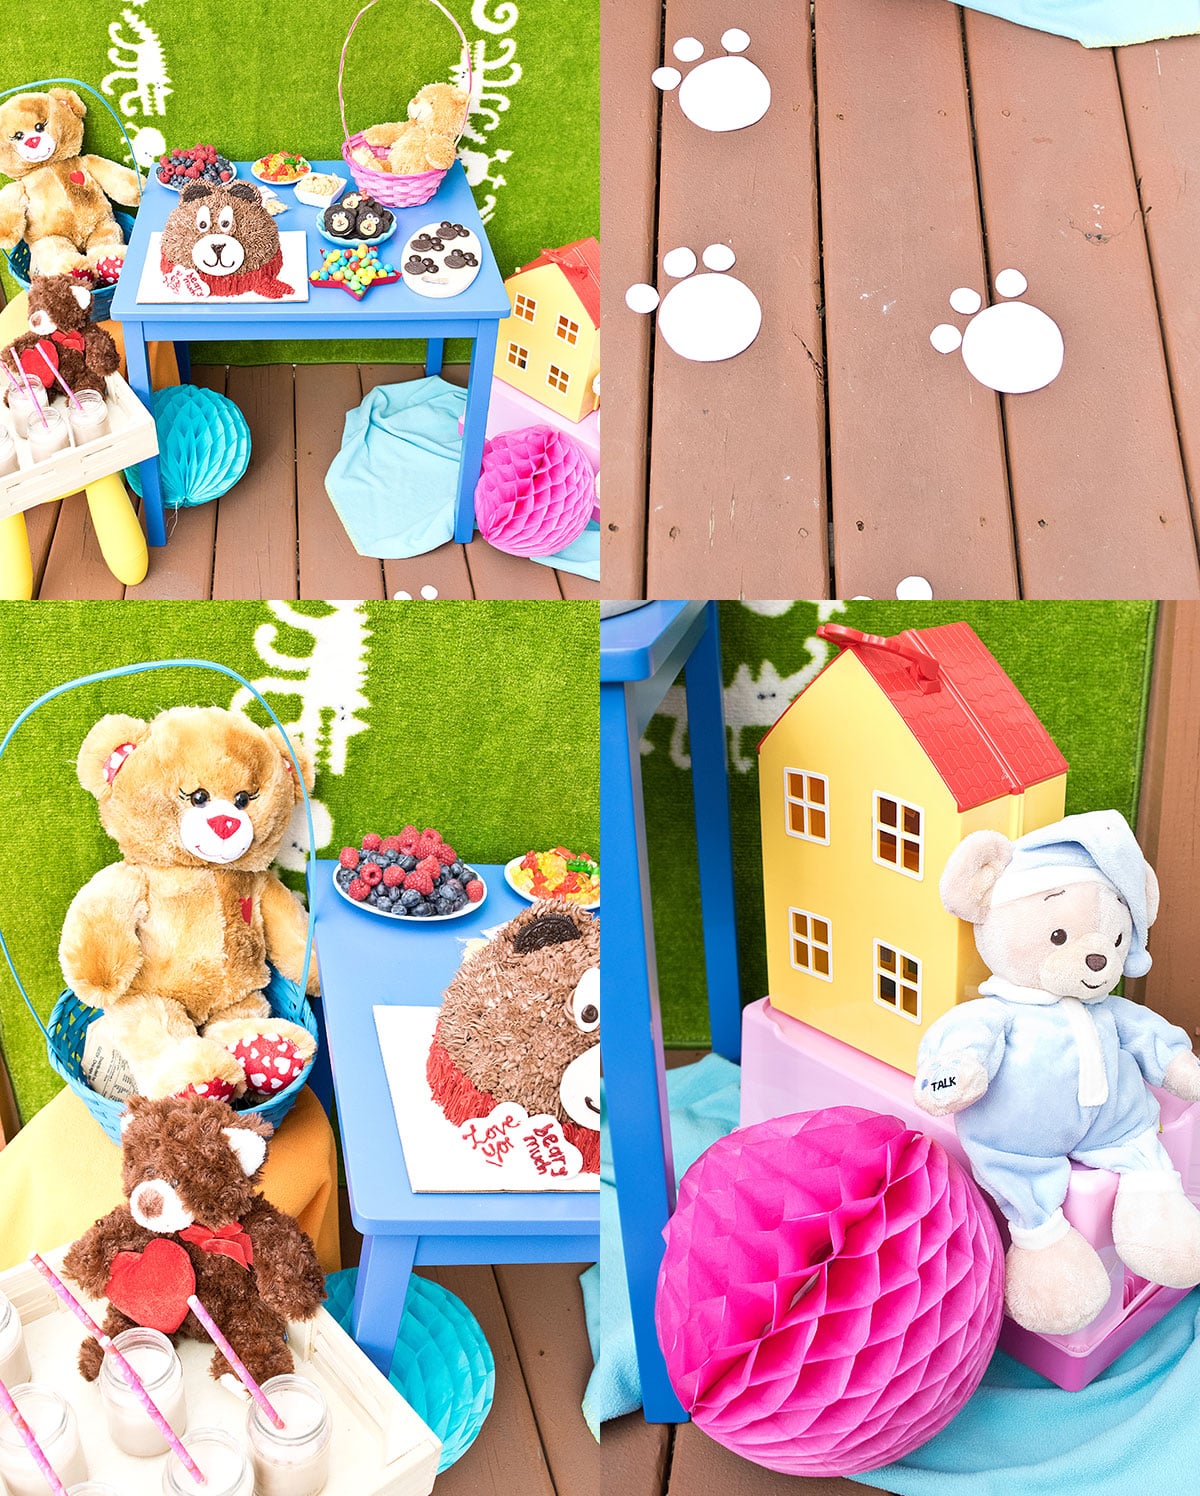 Collage Image With Teddy Bear Party Setup. 